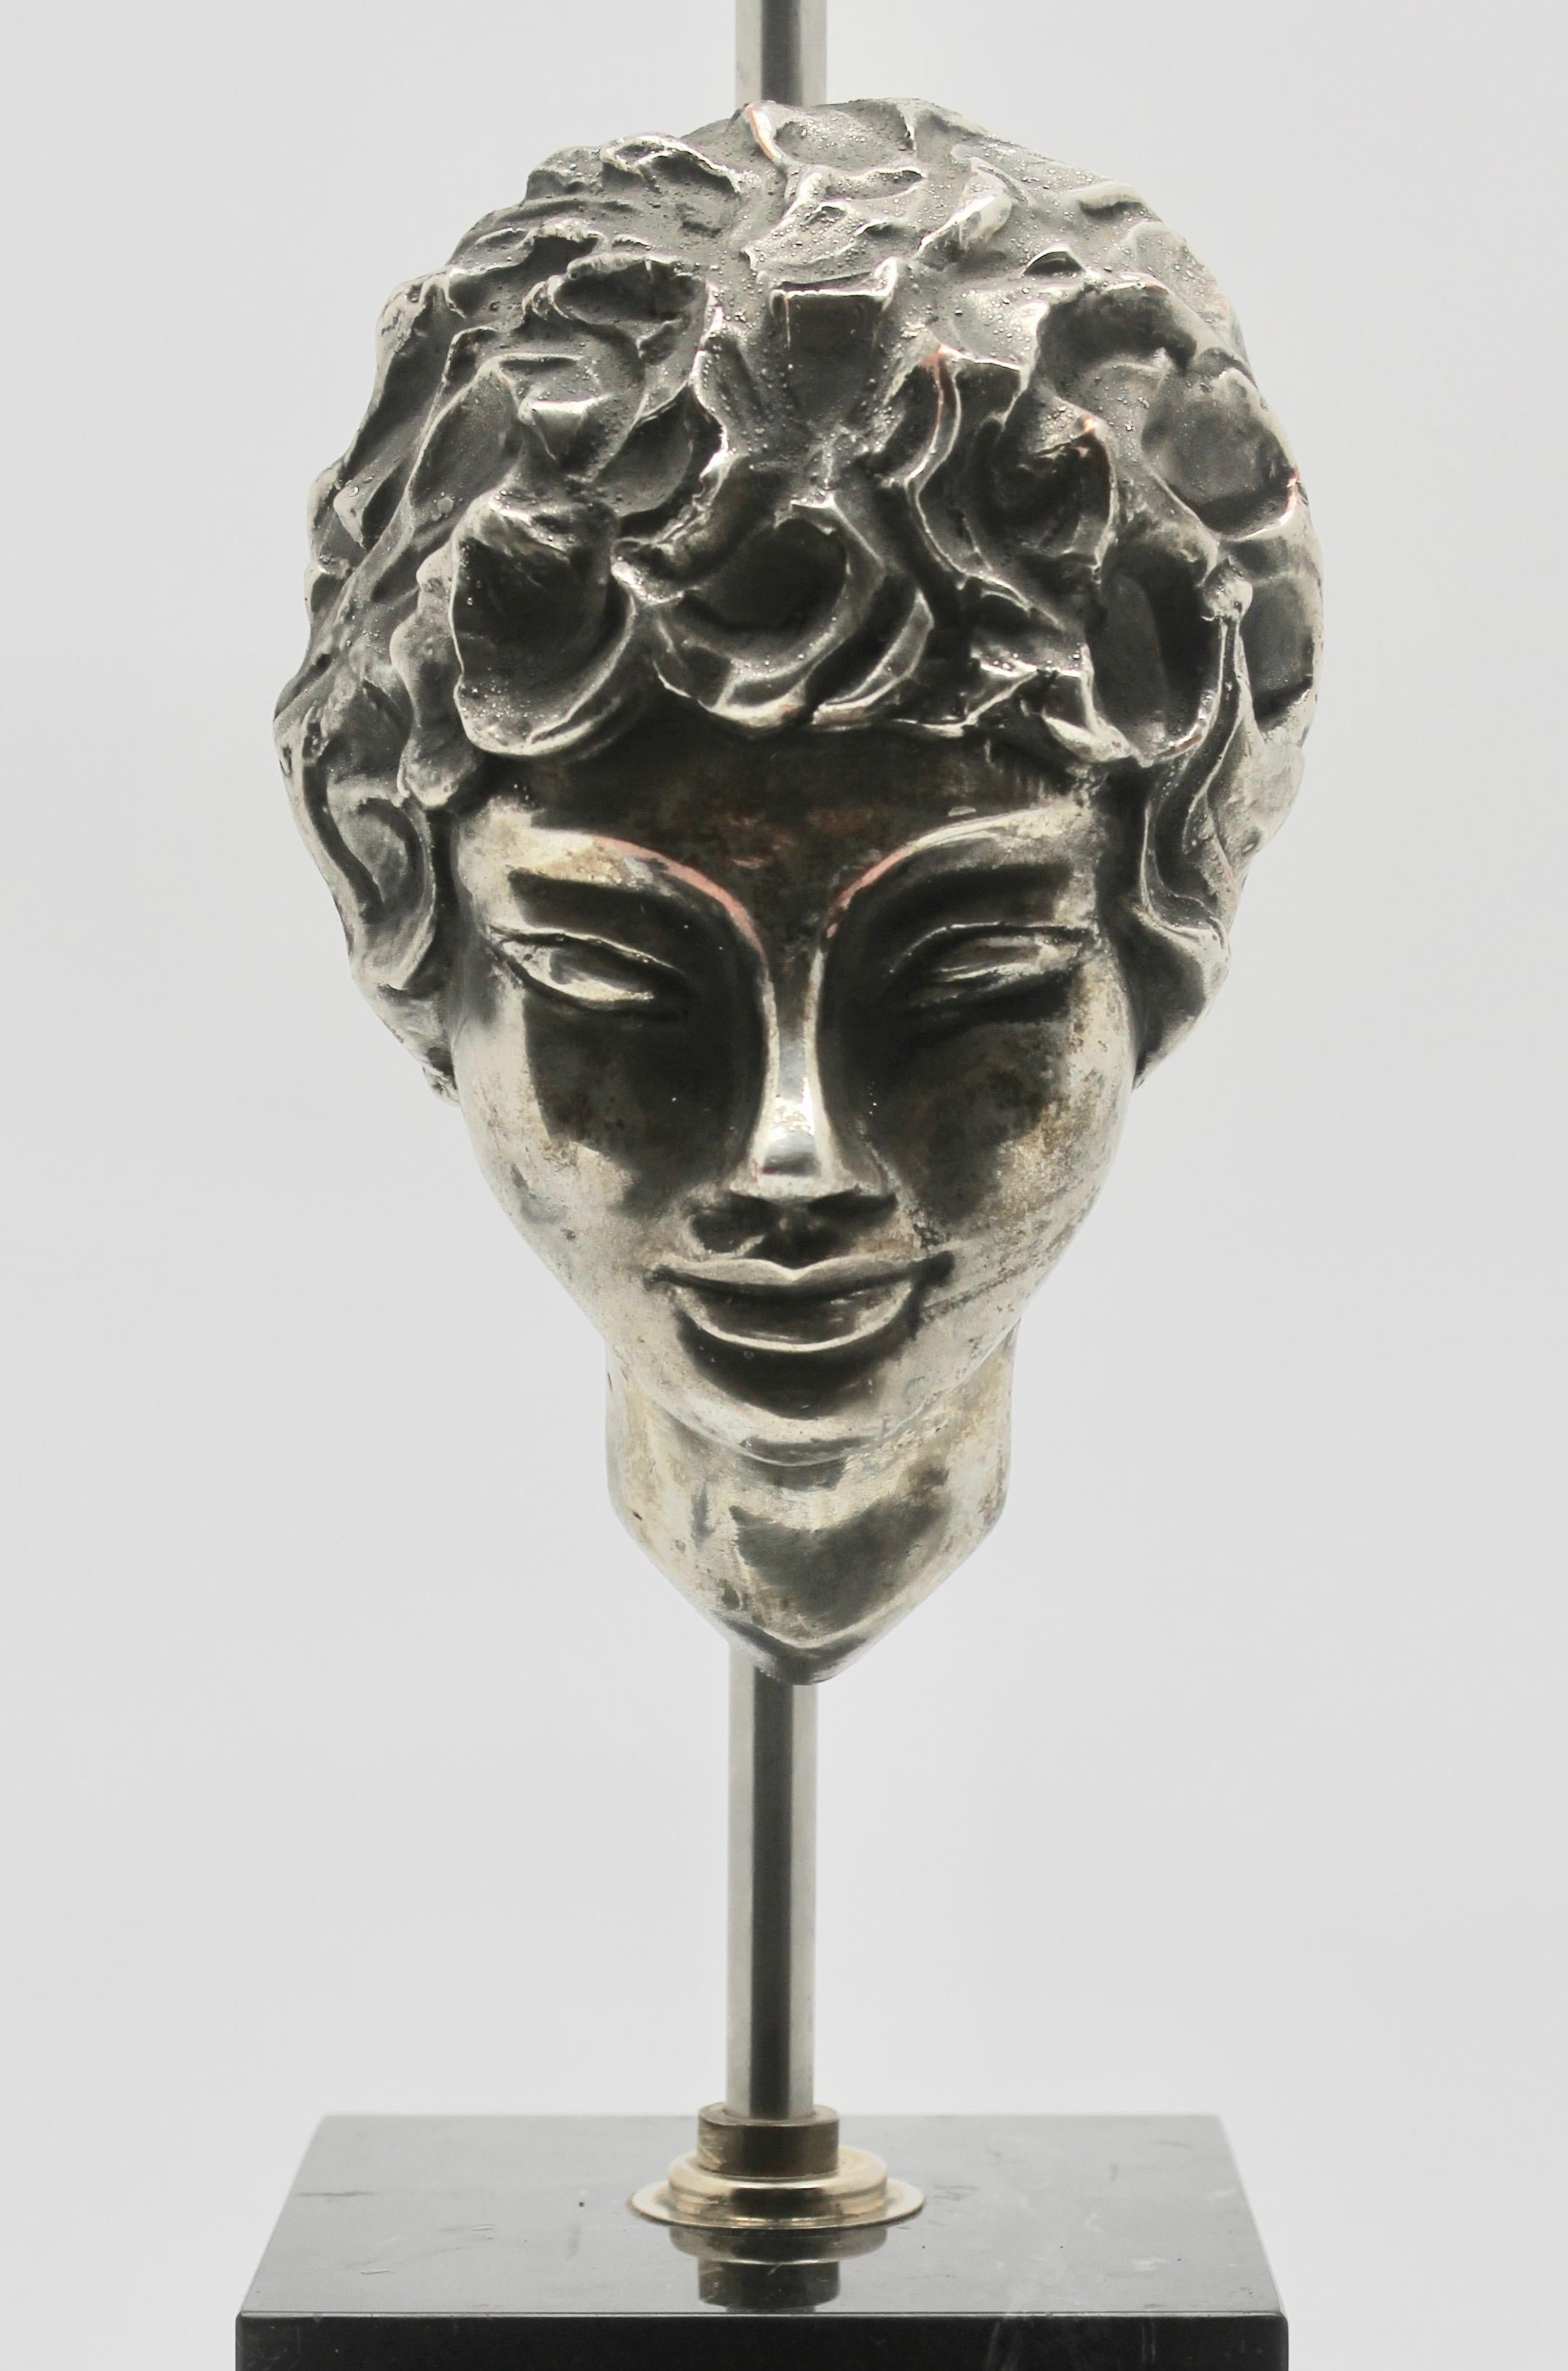 Hollywood Regency Table Lamp with Masque of a Female Head in the Classical Style, 1970s